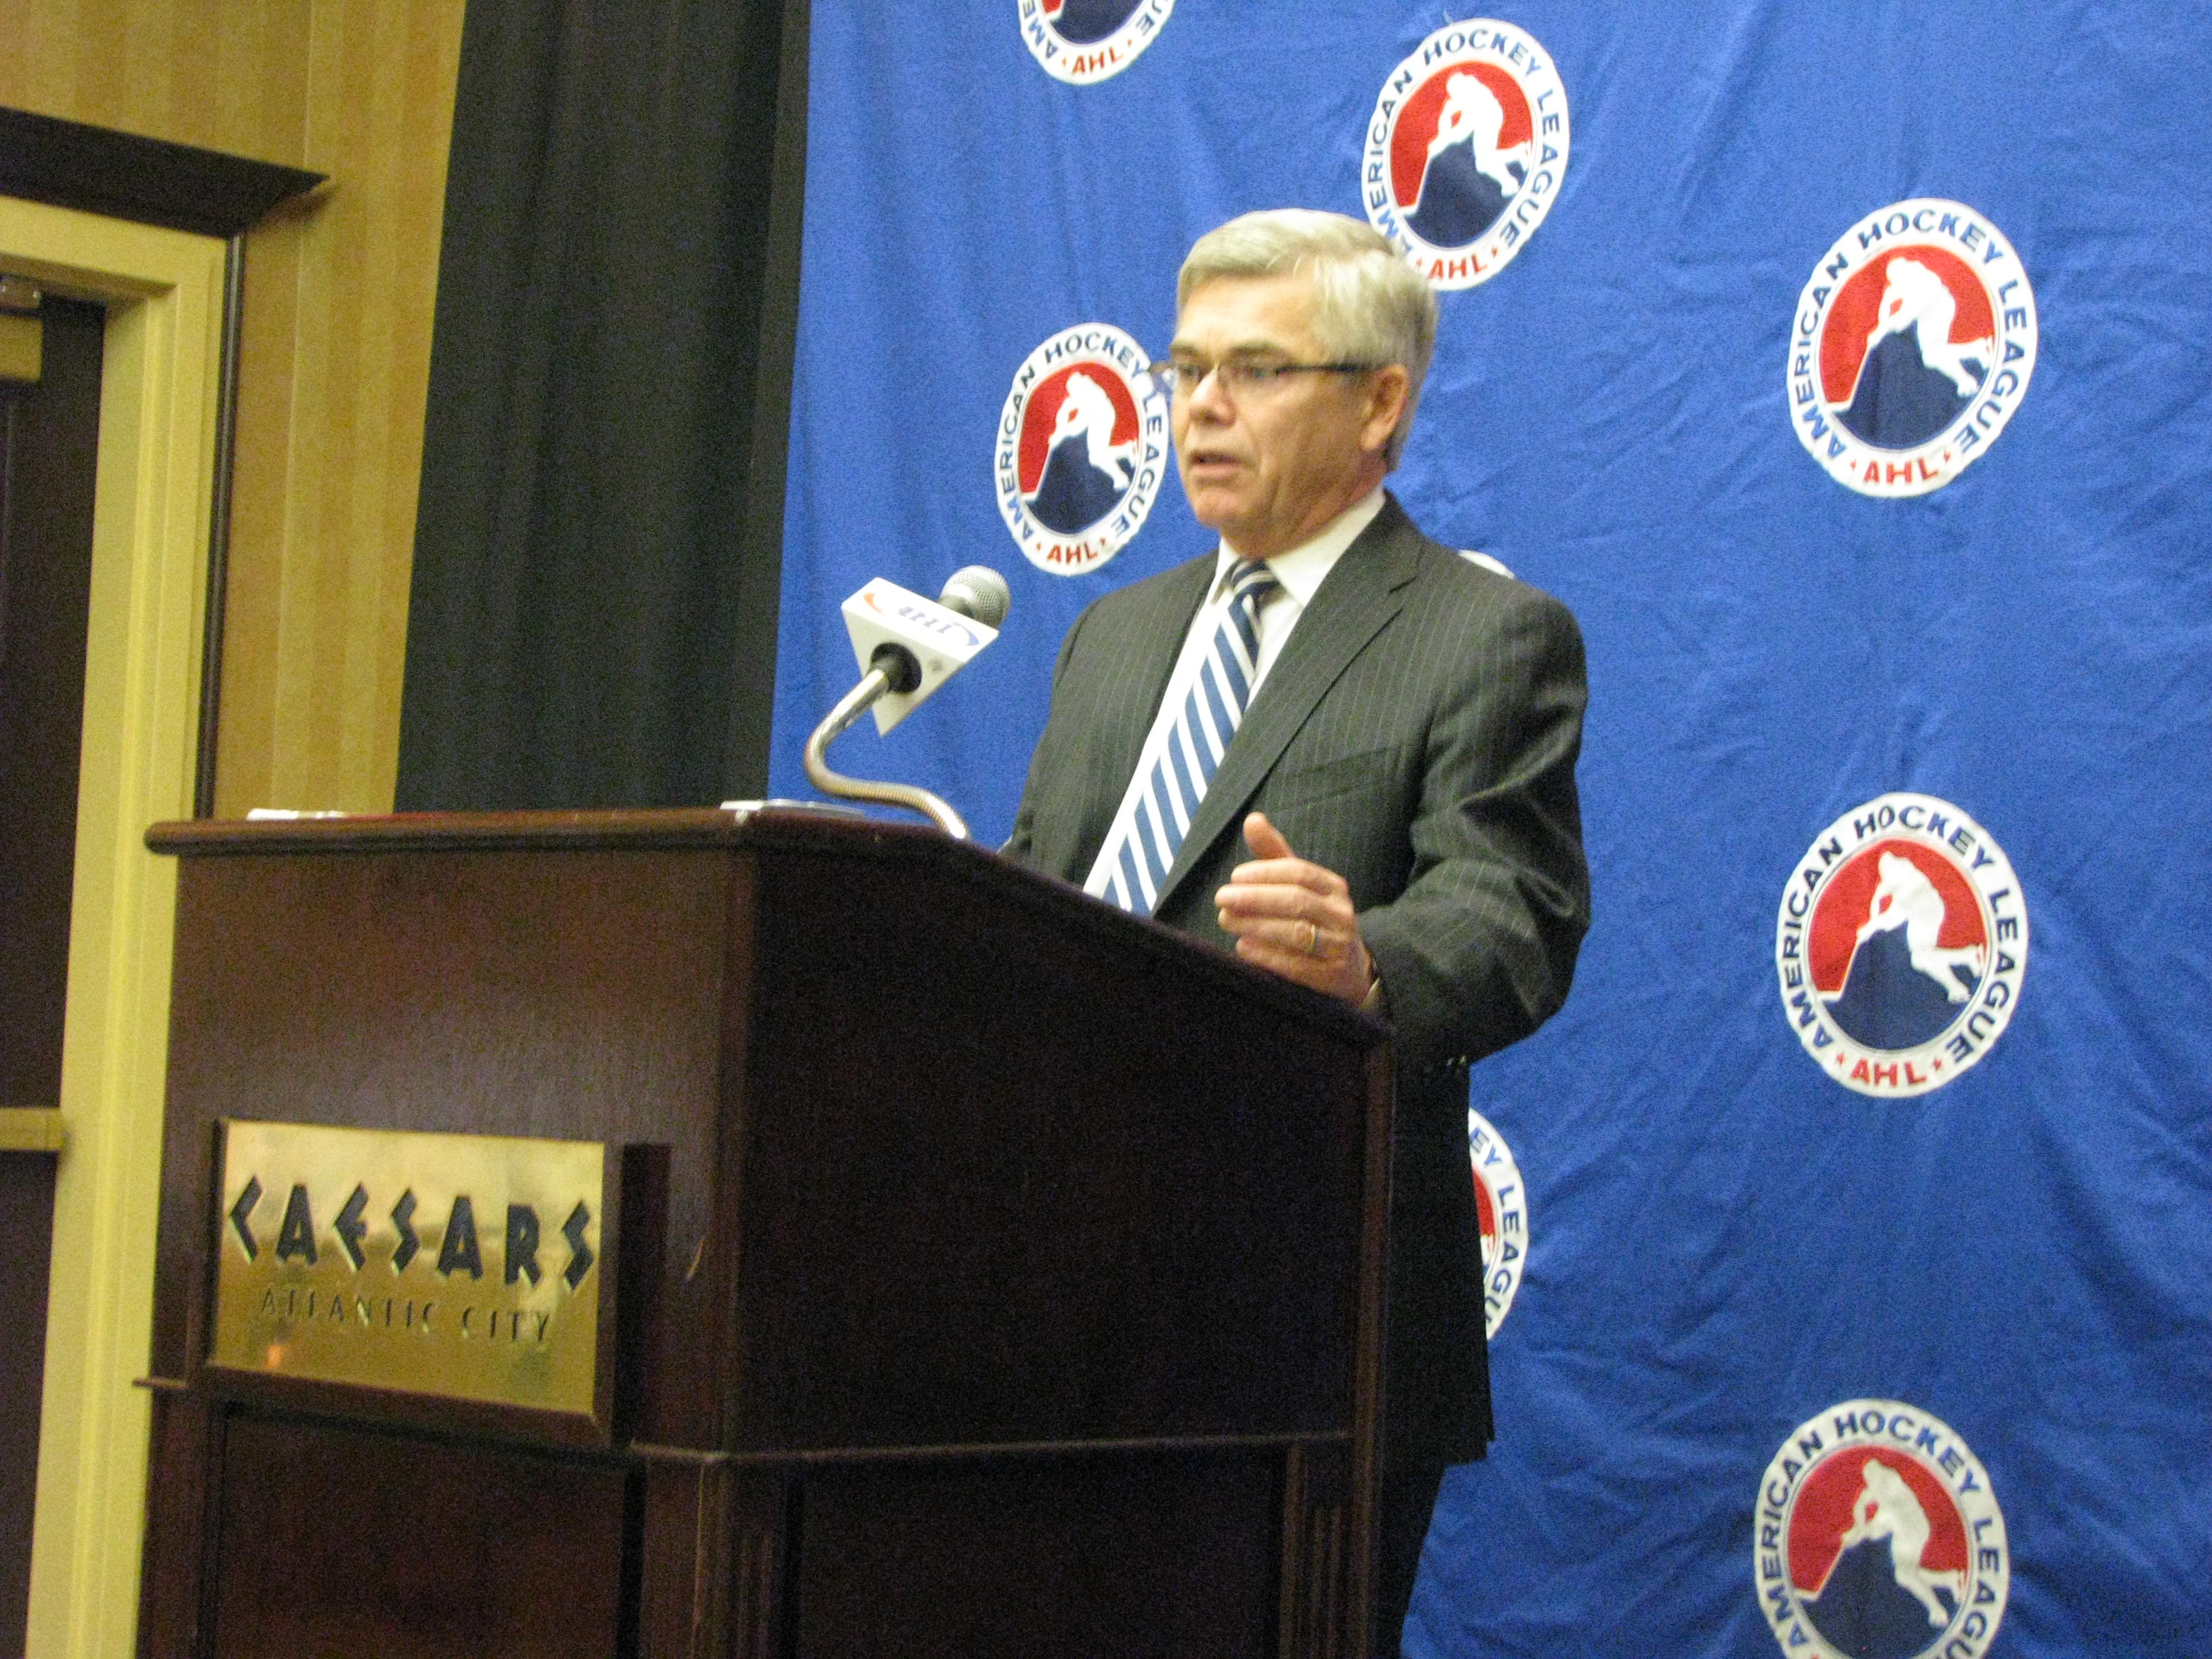 Dave Andrews 2012 AHL State of the League Address